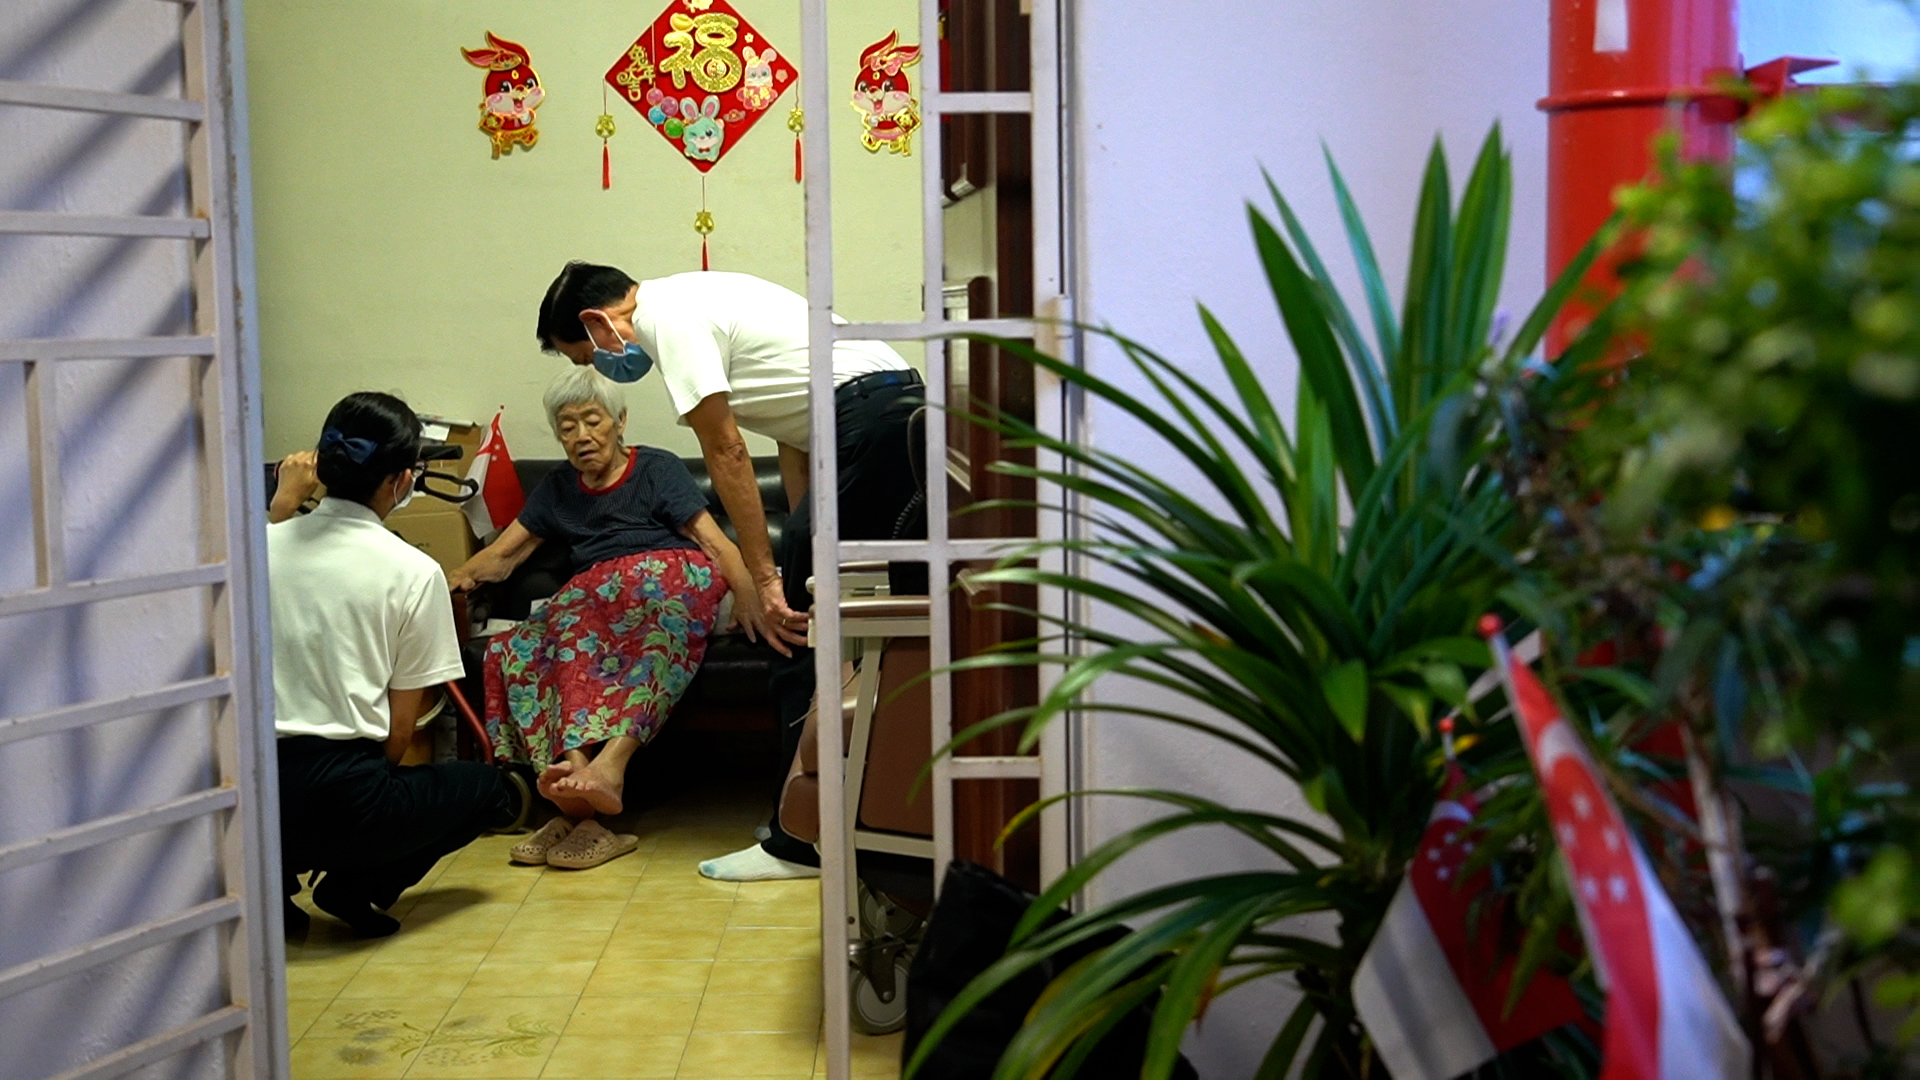 A decade of TCM home-based care for the needy and still going strong